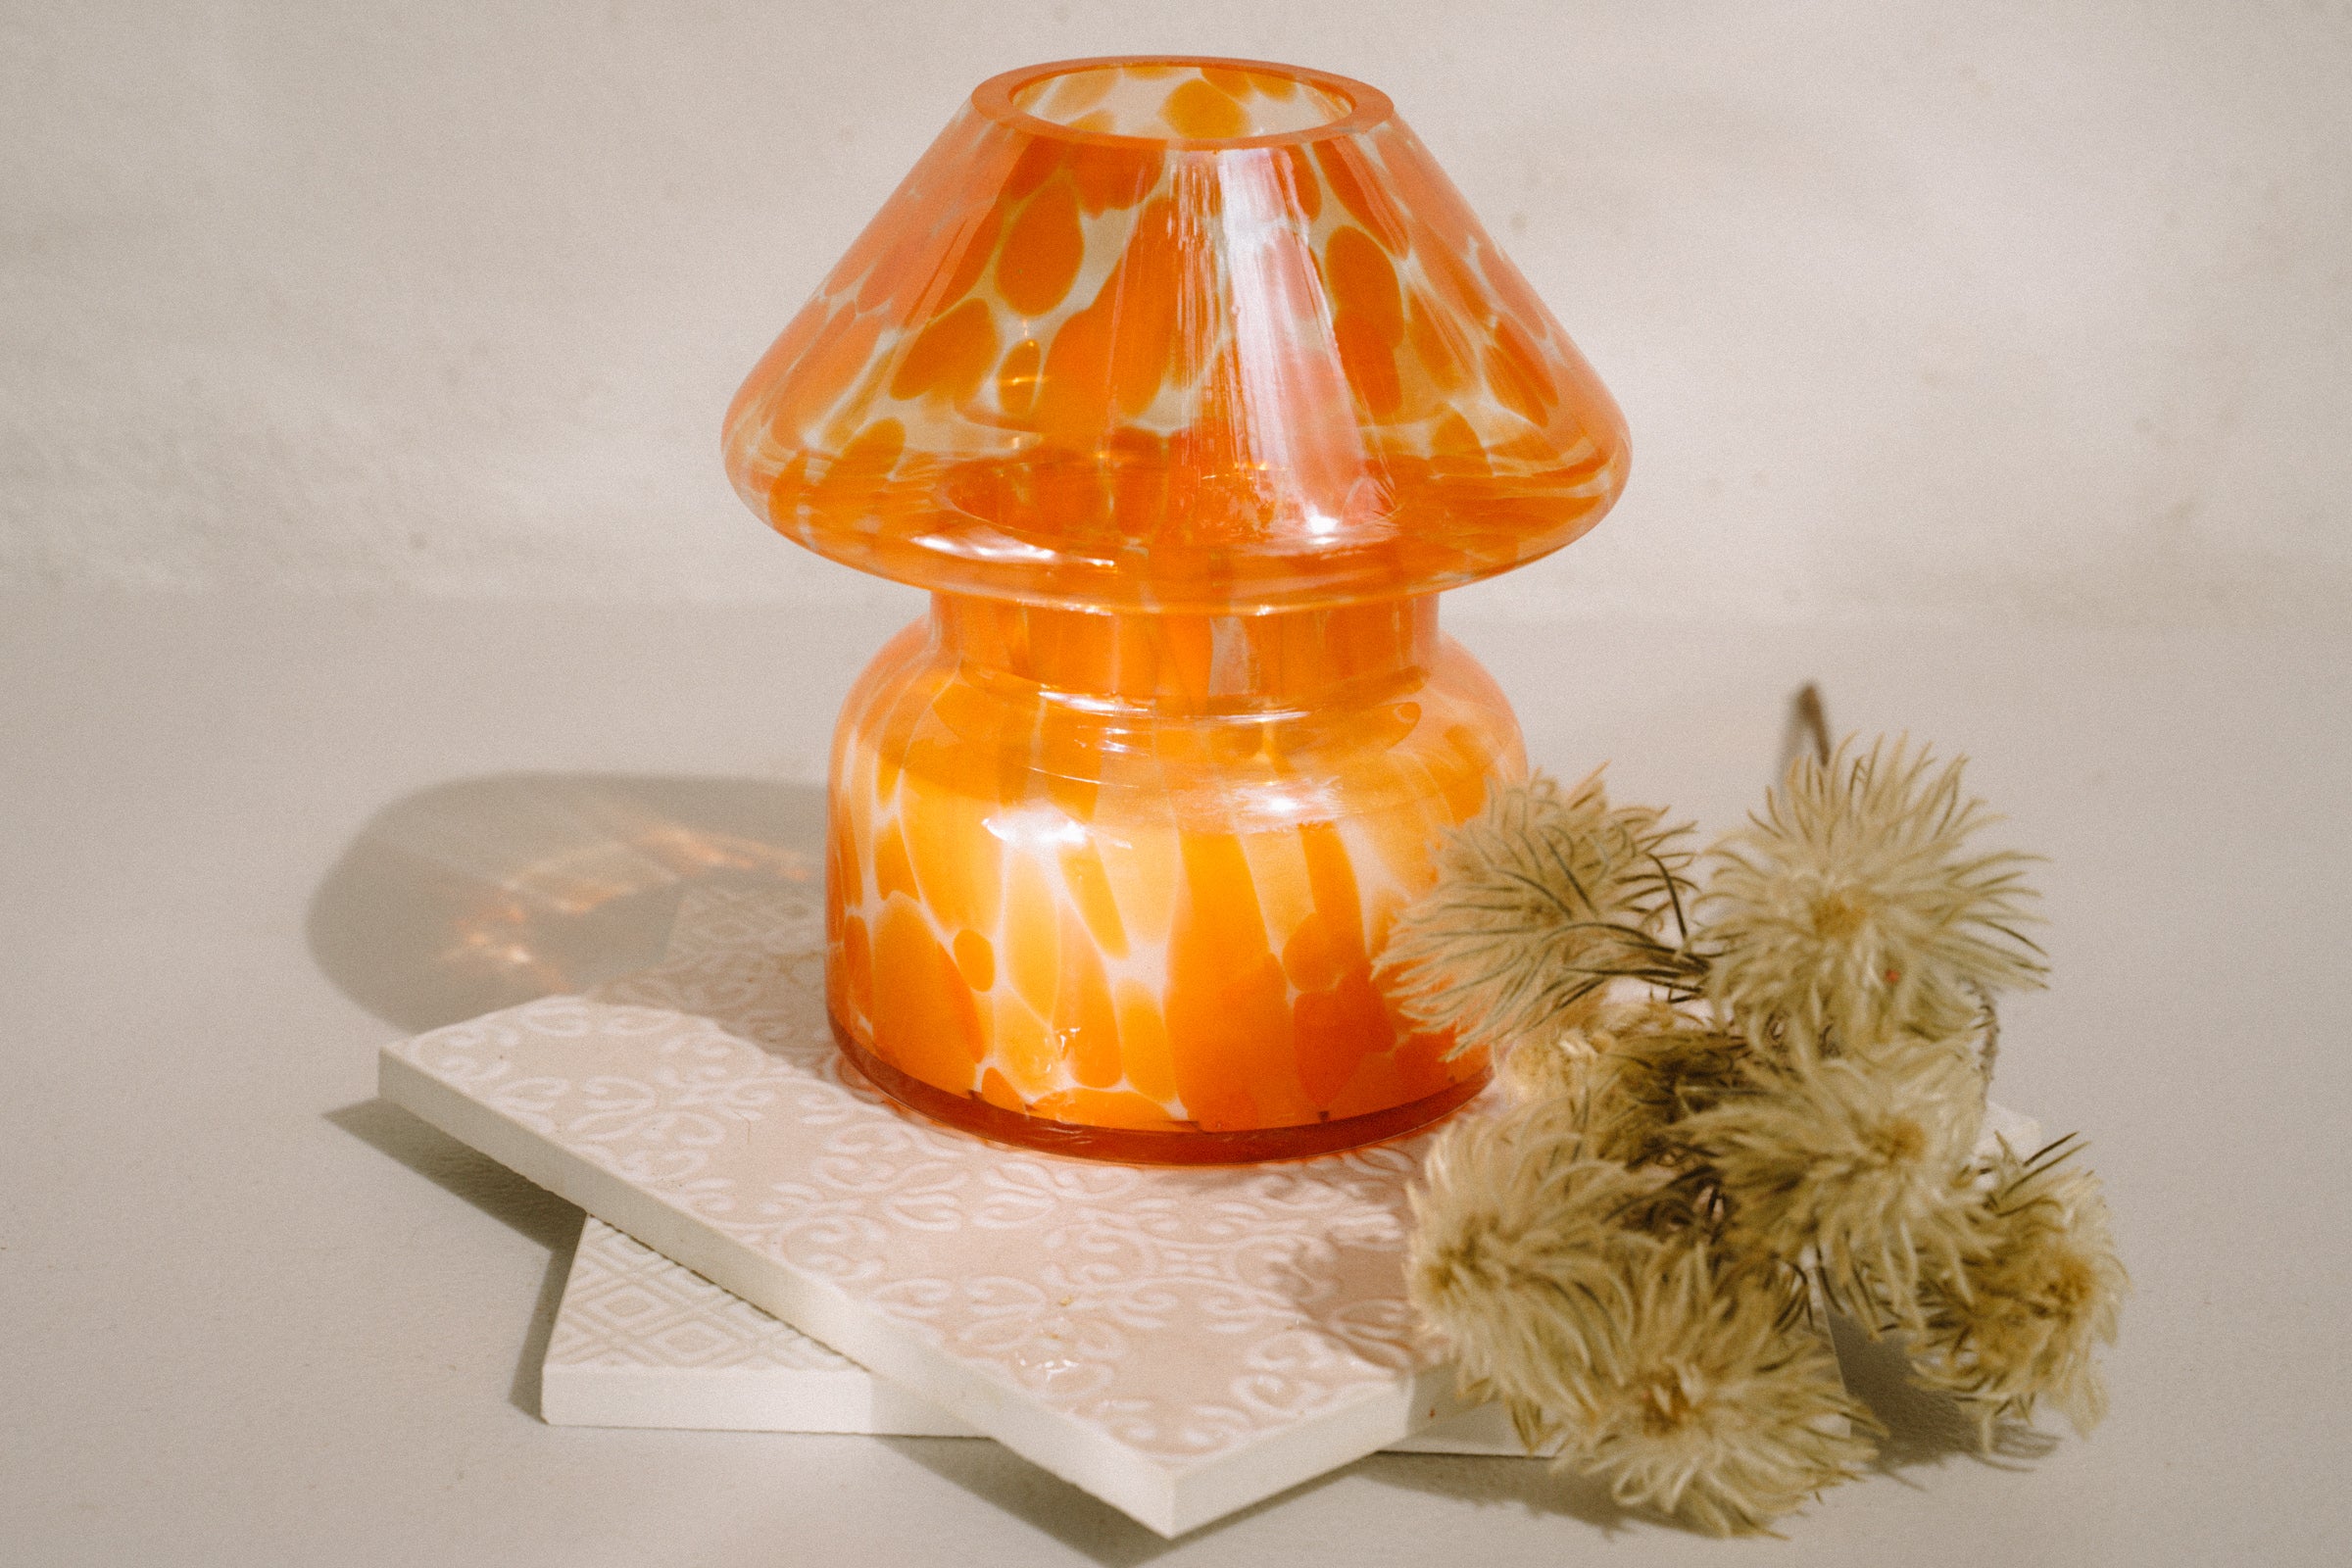 Mushroom candle lamp with light and dark orange spots on clear glass with opal tint. Filled with 100% soy wax on tiles with dried flowers.